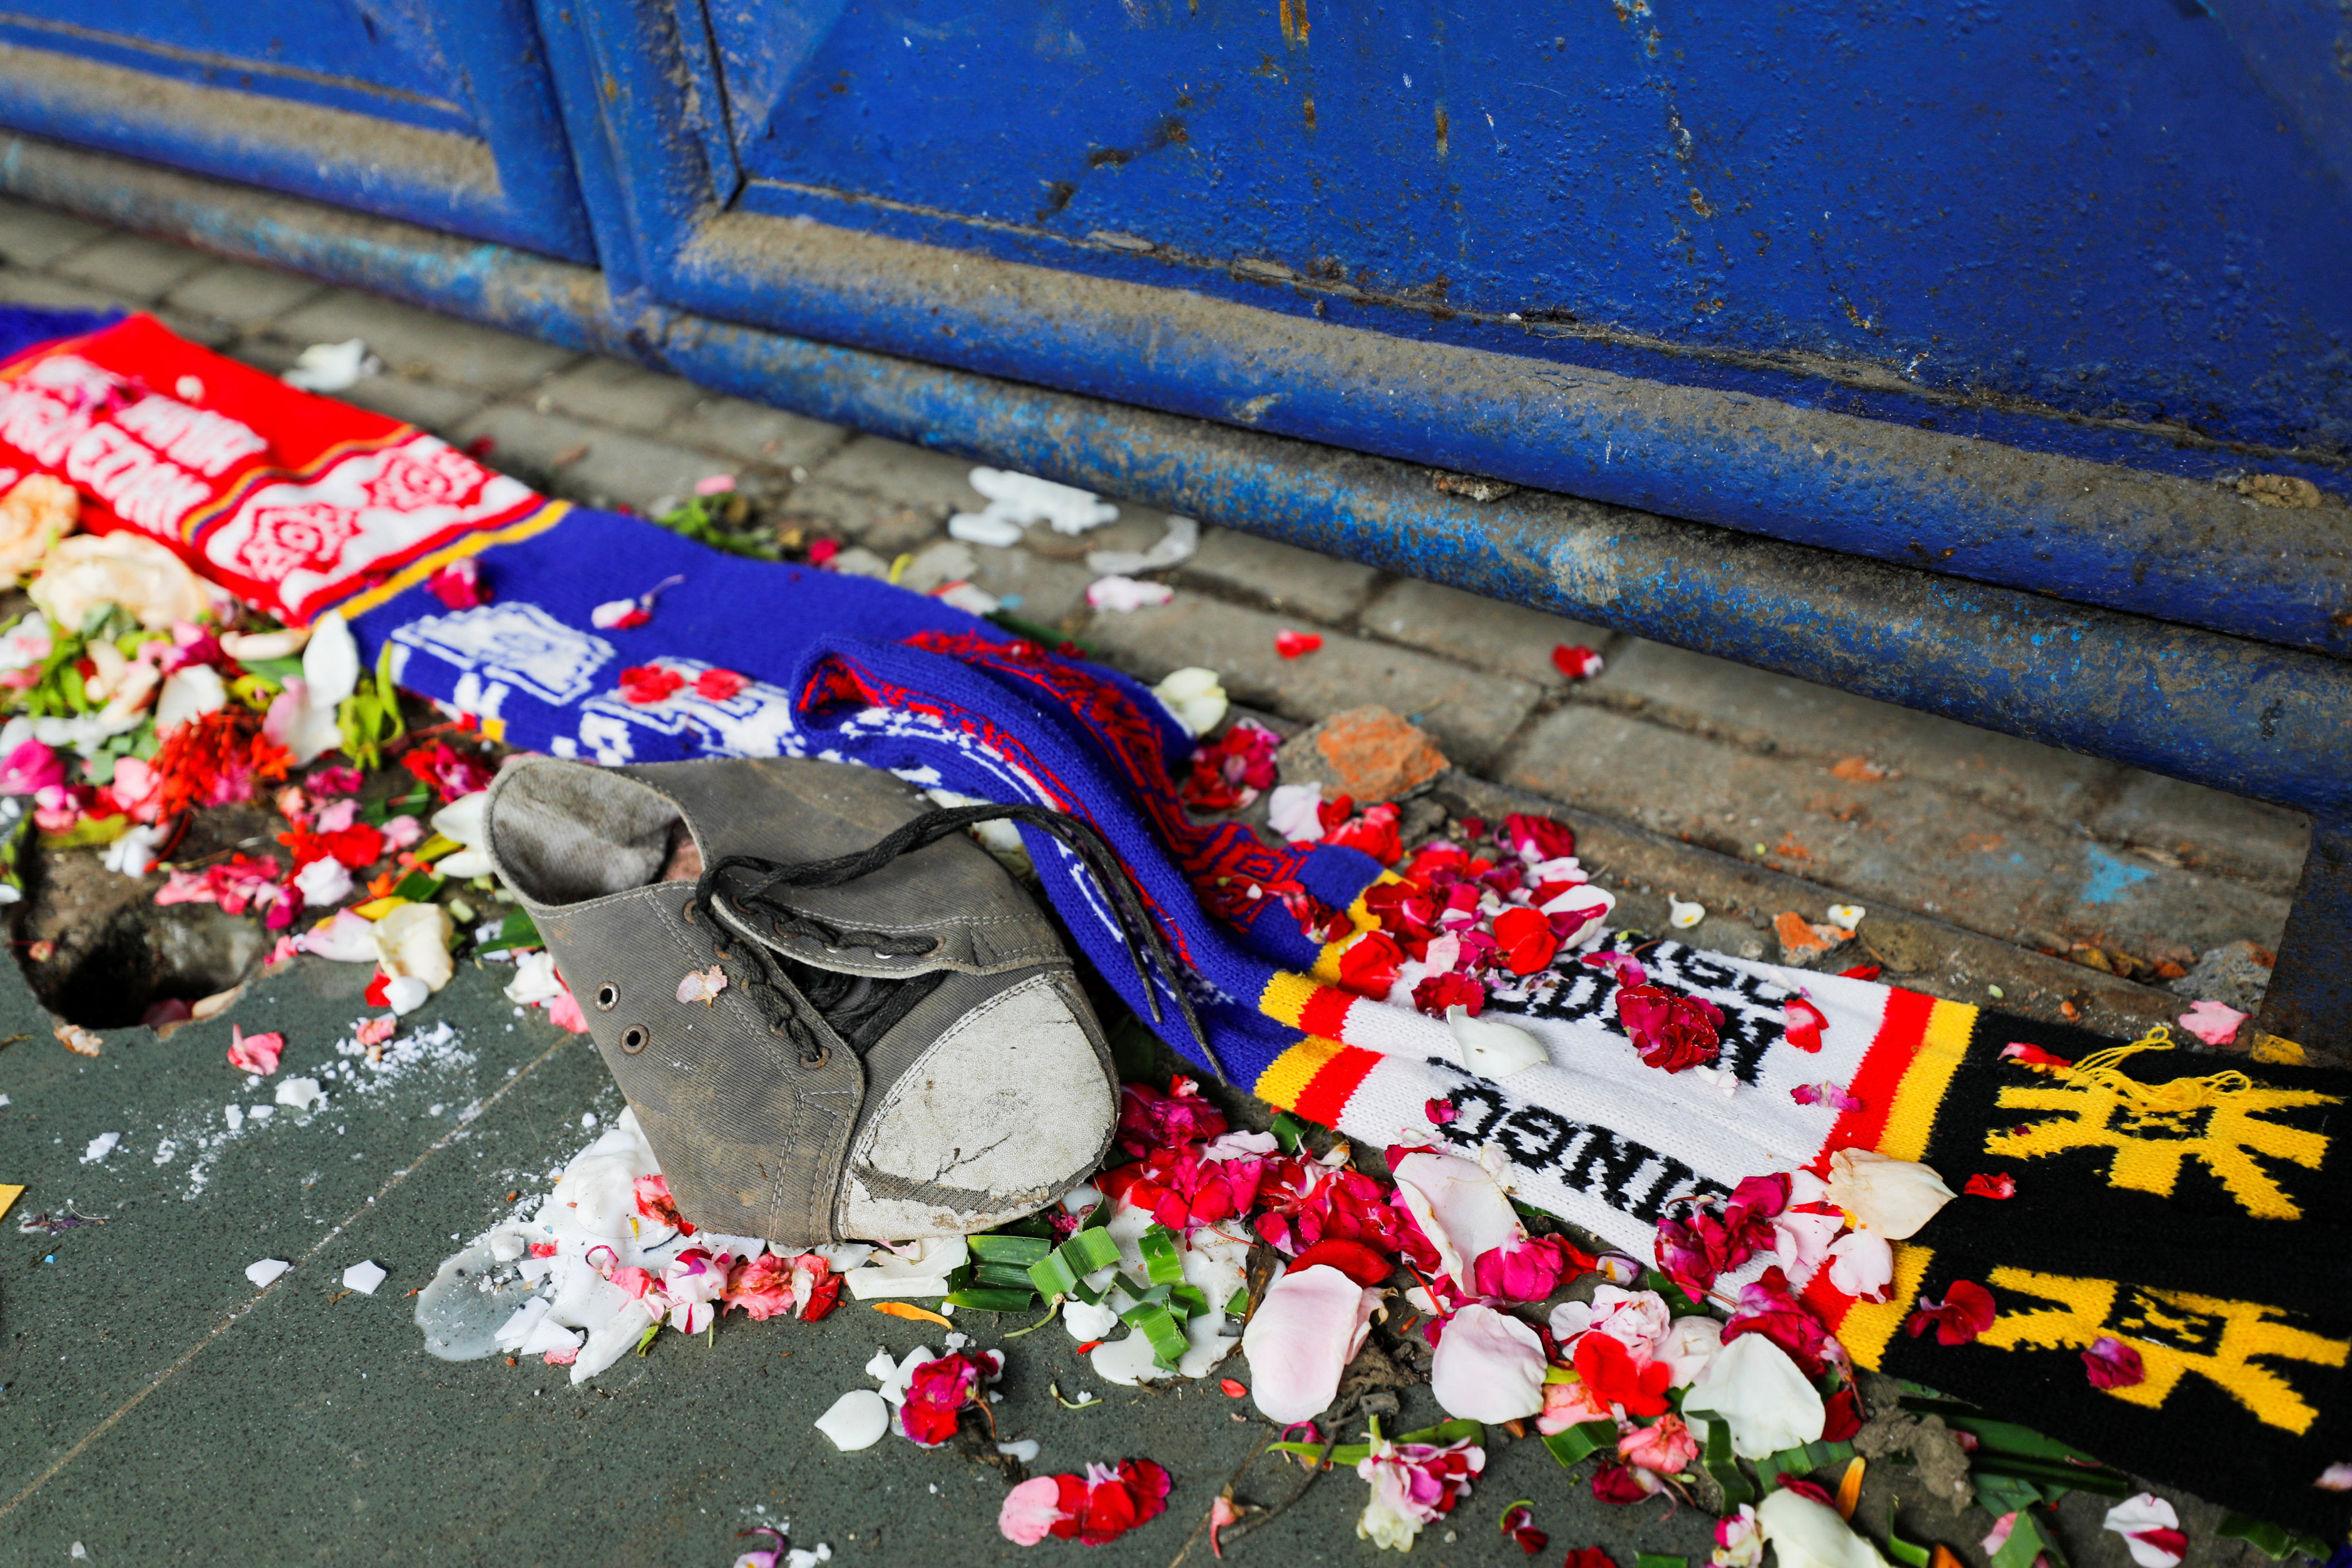 A shoe and soccer scarves are seen among petals near a gate of Kanjuruhan Stadium, after a riot and stampede following soccer match in Indonesia killed at least 130 people. Photo: Reuters/File